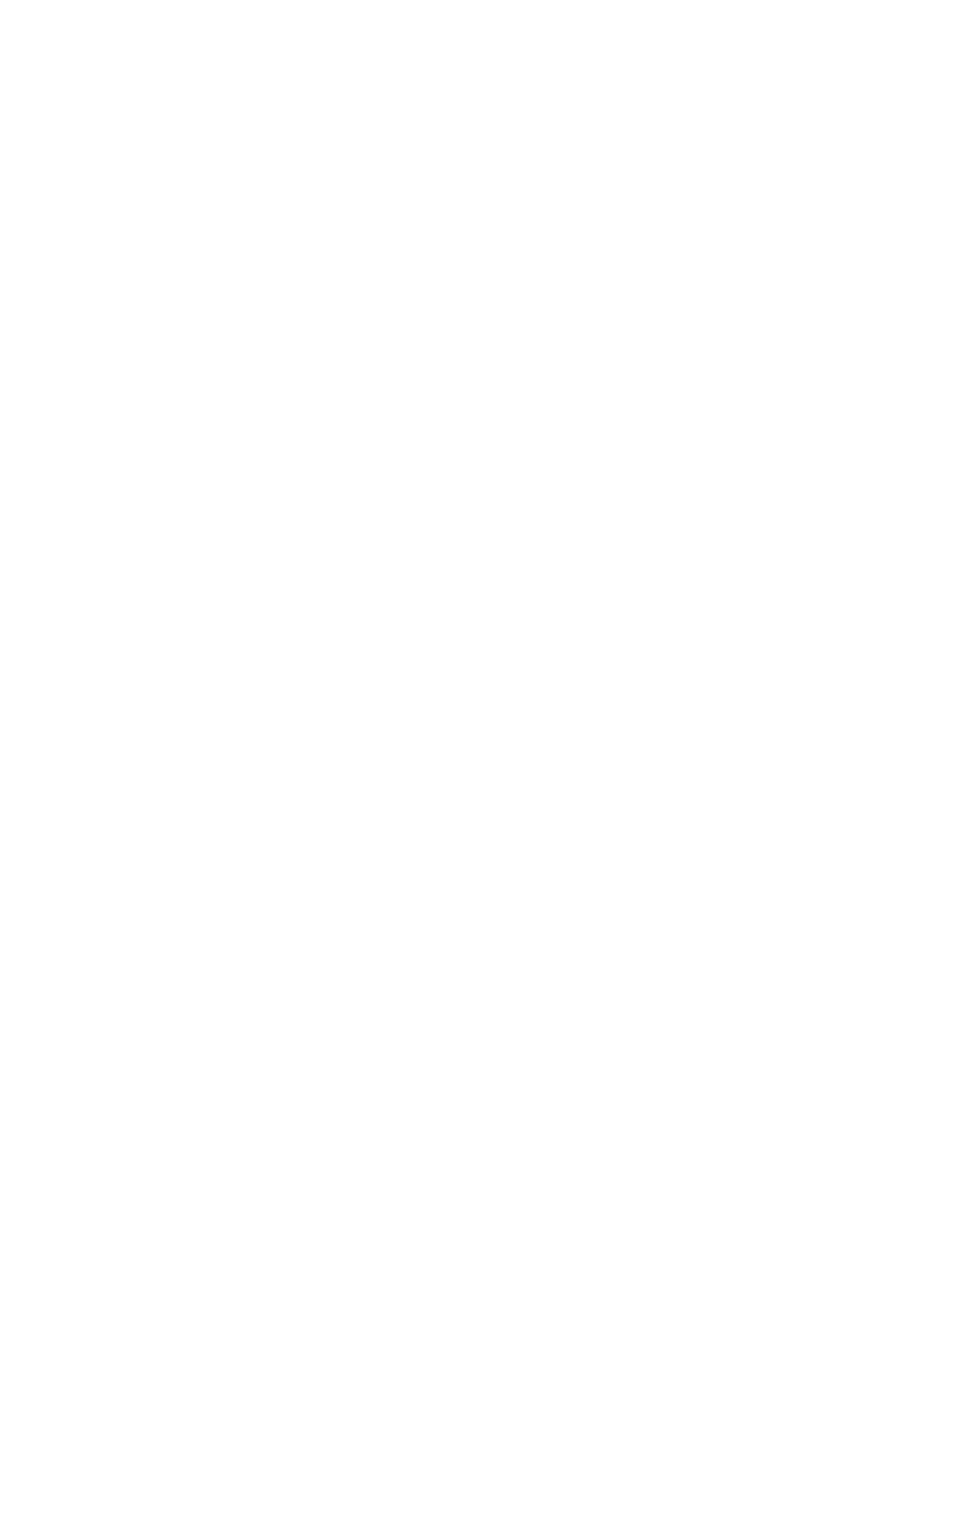 TG Therapeutics logo for dark backgrounds (transparent PNG)